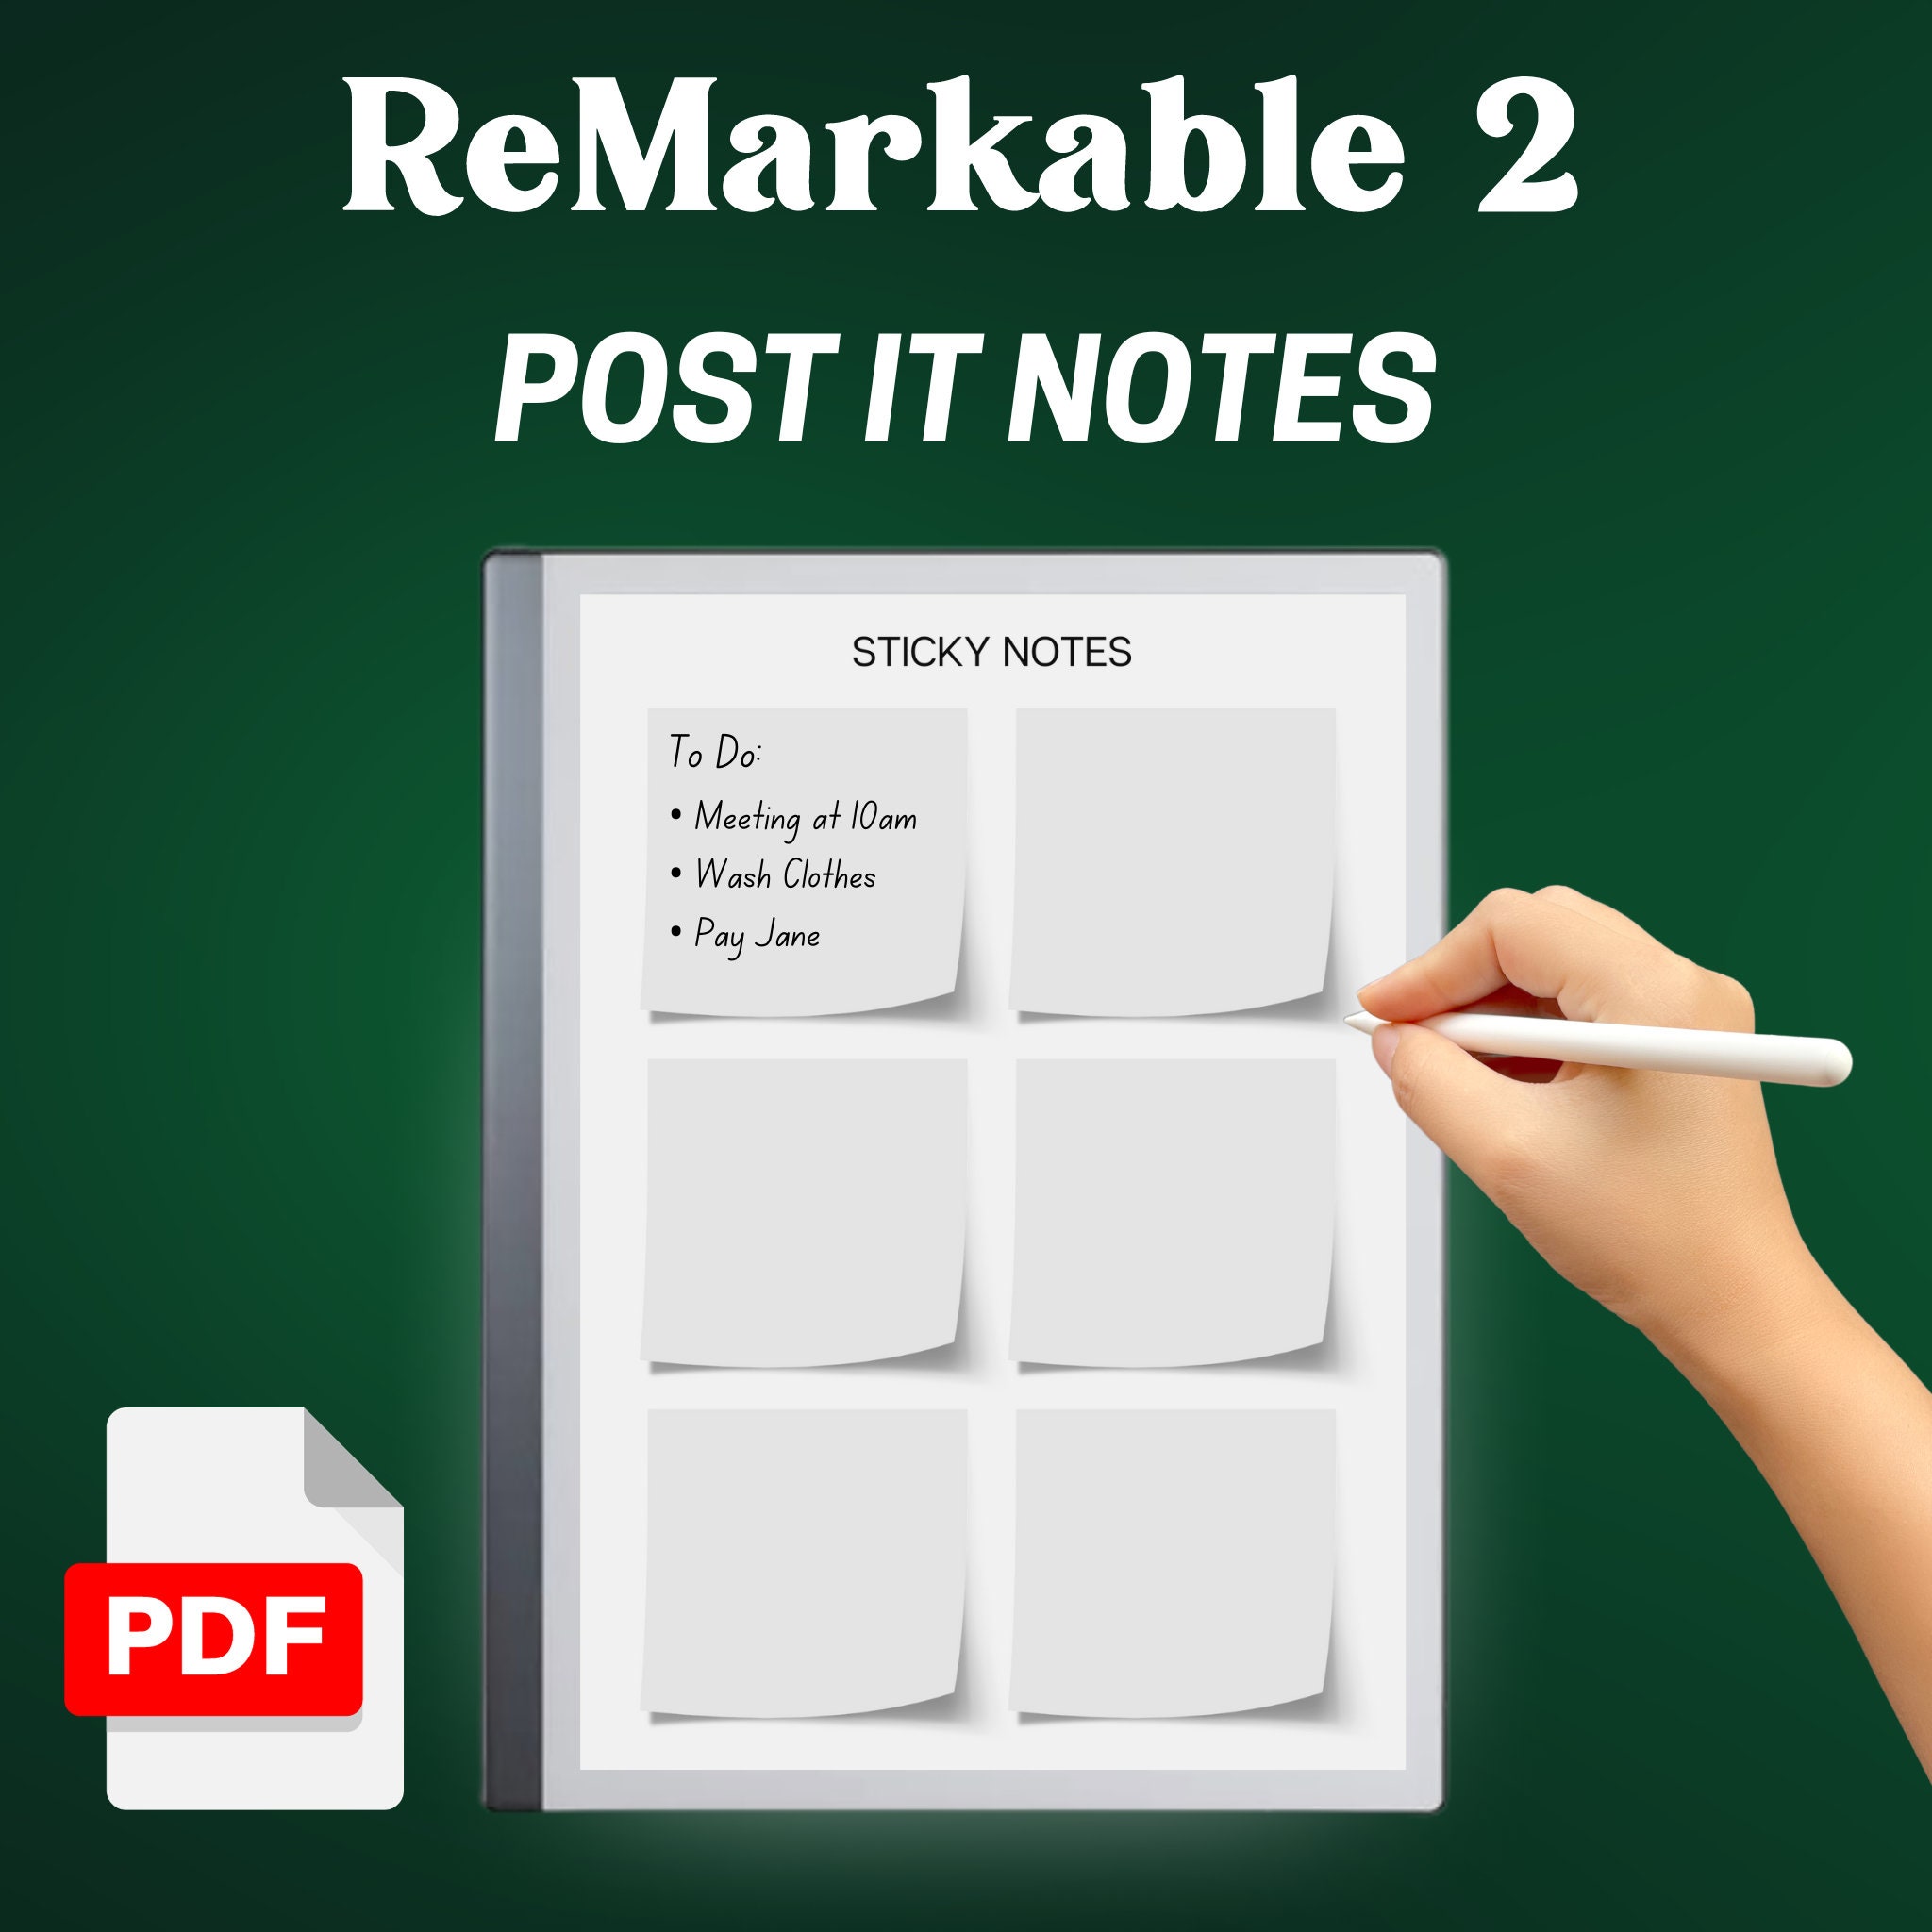 To Do List Post-it Notes List Sticky Notes in 1.5x3 Inches 11 Check Boxes  and Lines Small Anything List 50 Sheets per Pad 